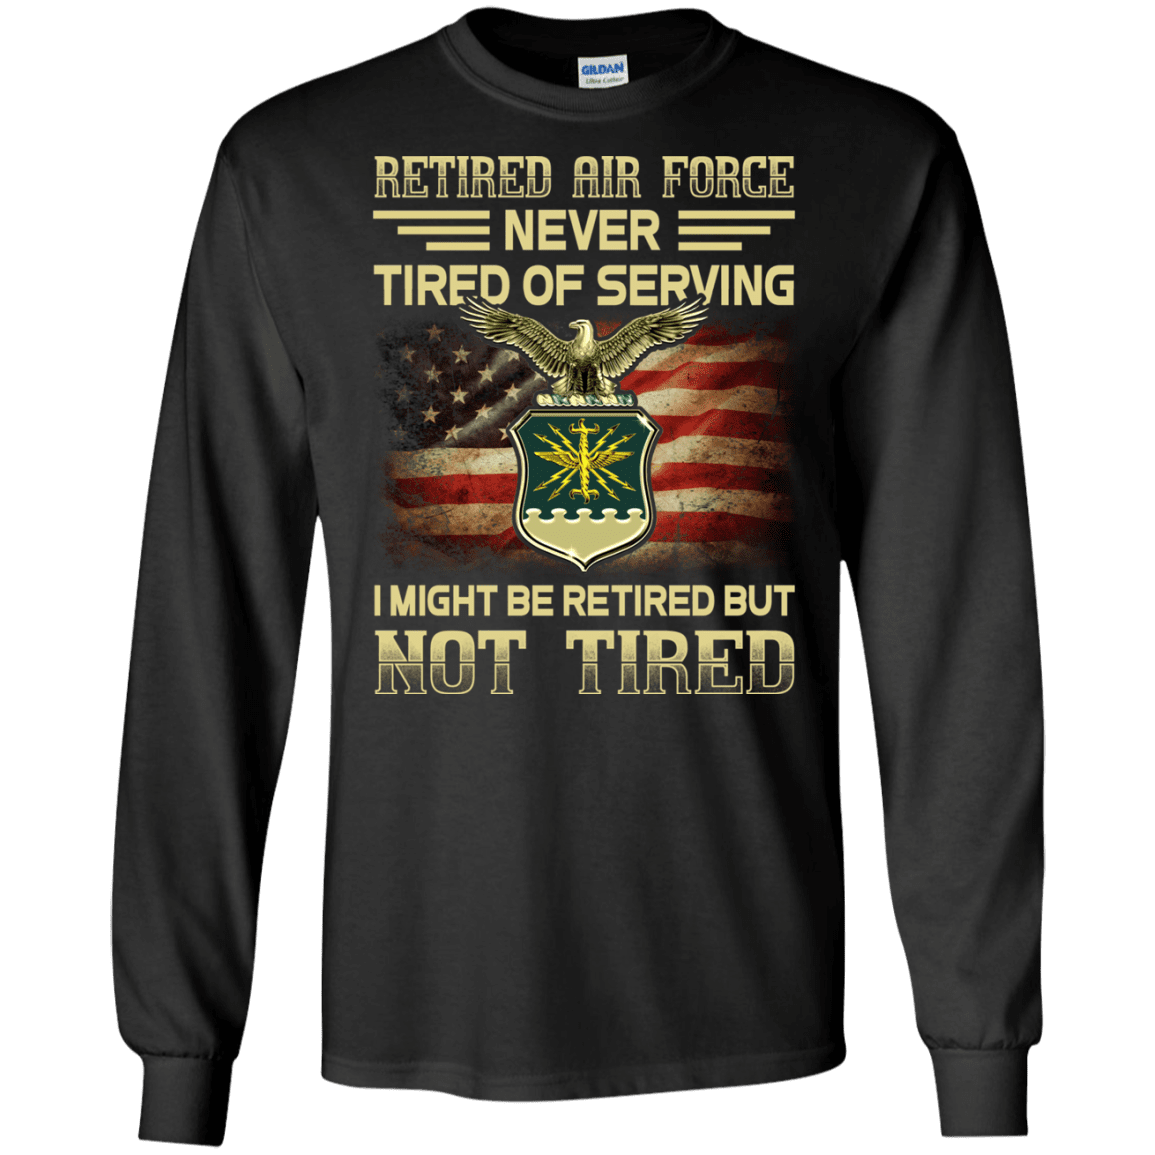 Retired Air Force Never Tired of Serving Front T Shirts-TShirt-USAF-Veterans Nation